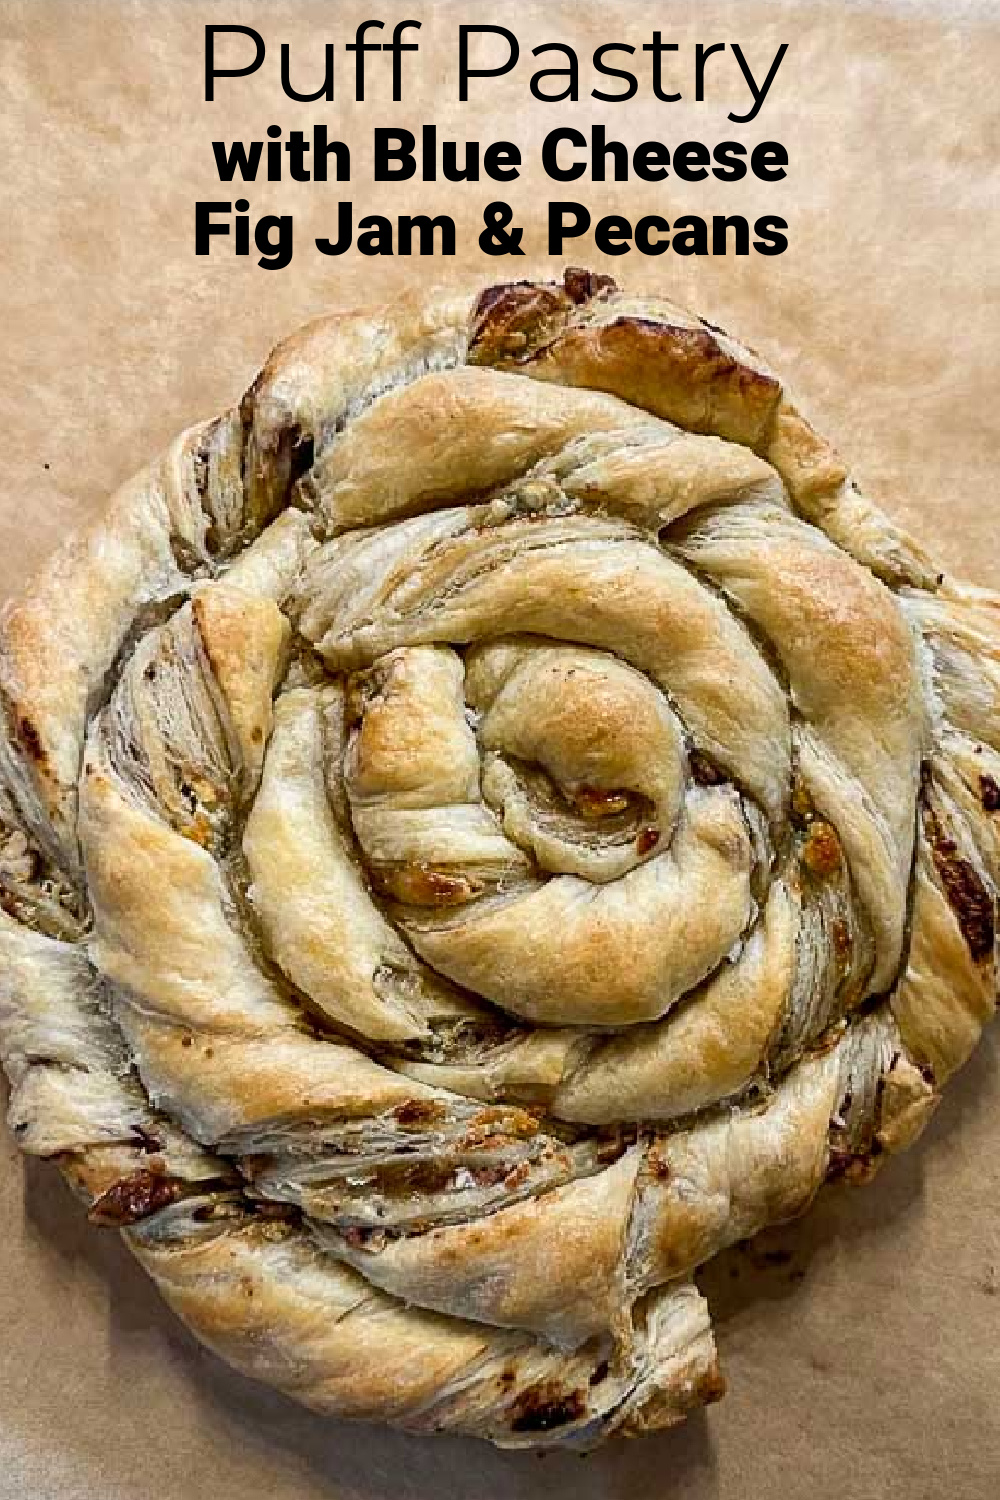 Blue cheese puff pastry in a spiral shape on parchement.